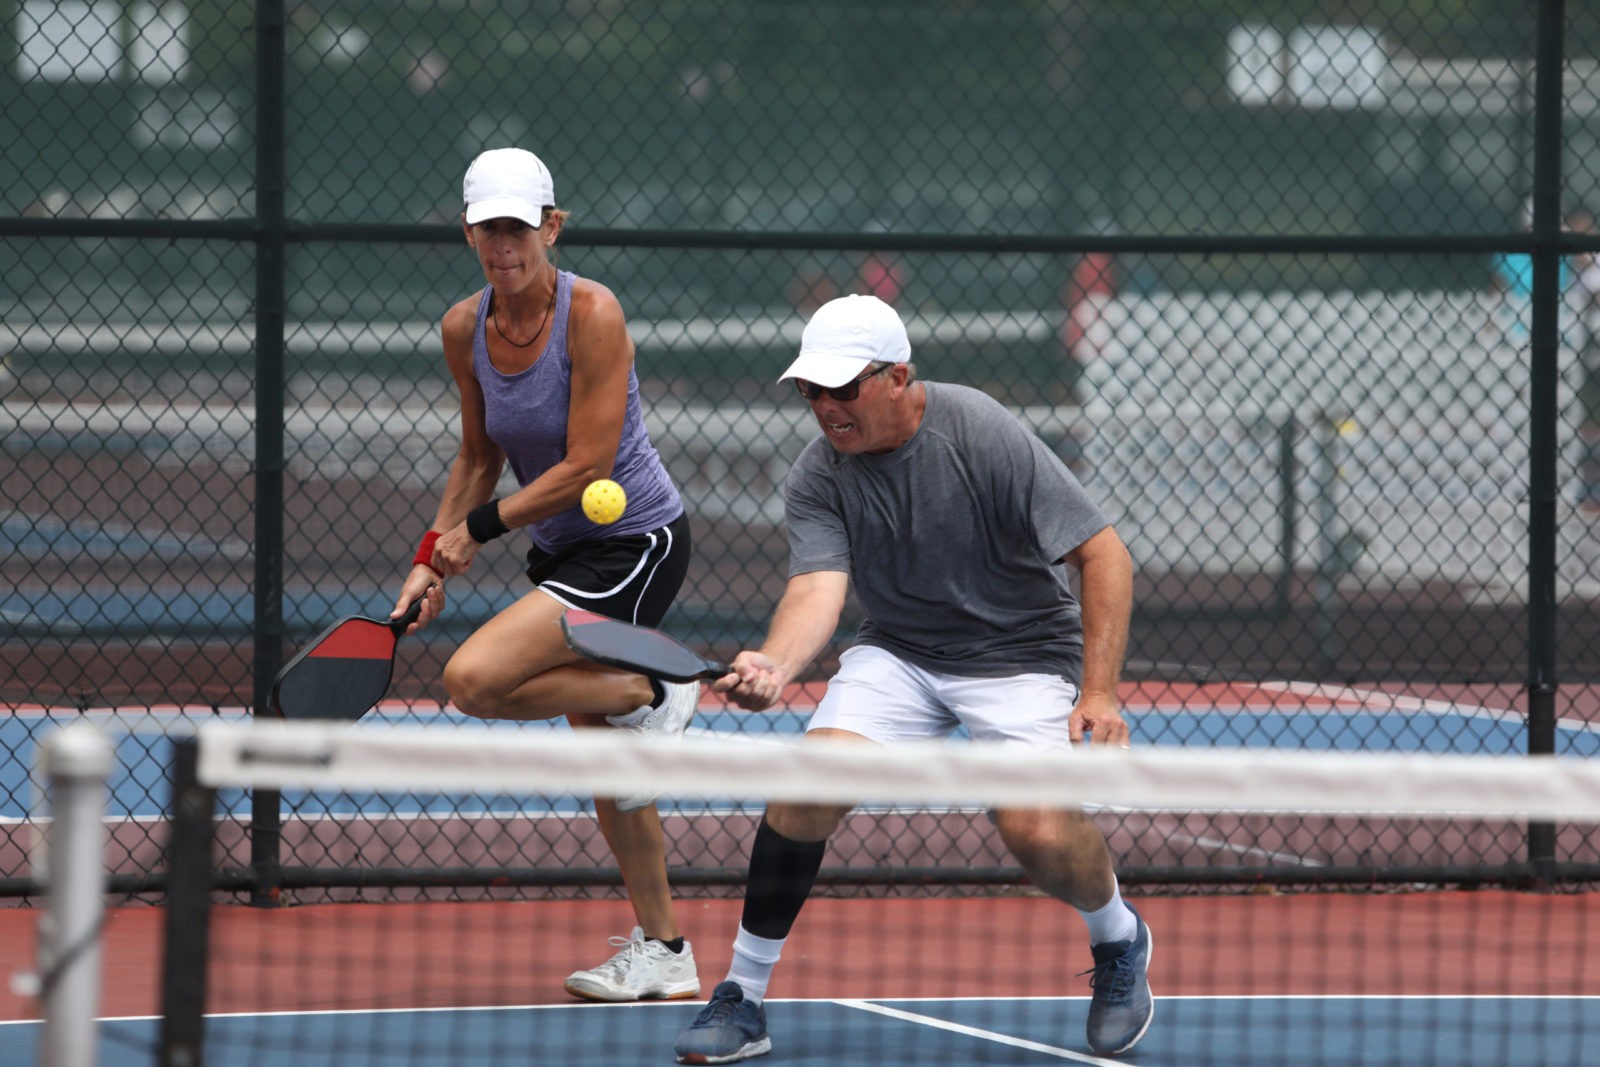 Physical and Mental Benefits of Pickleball